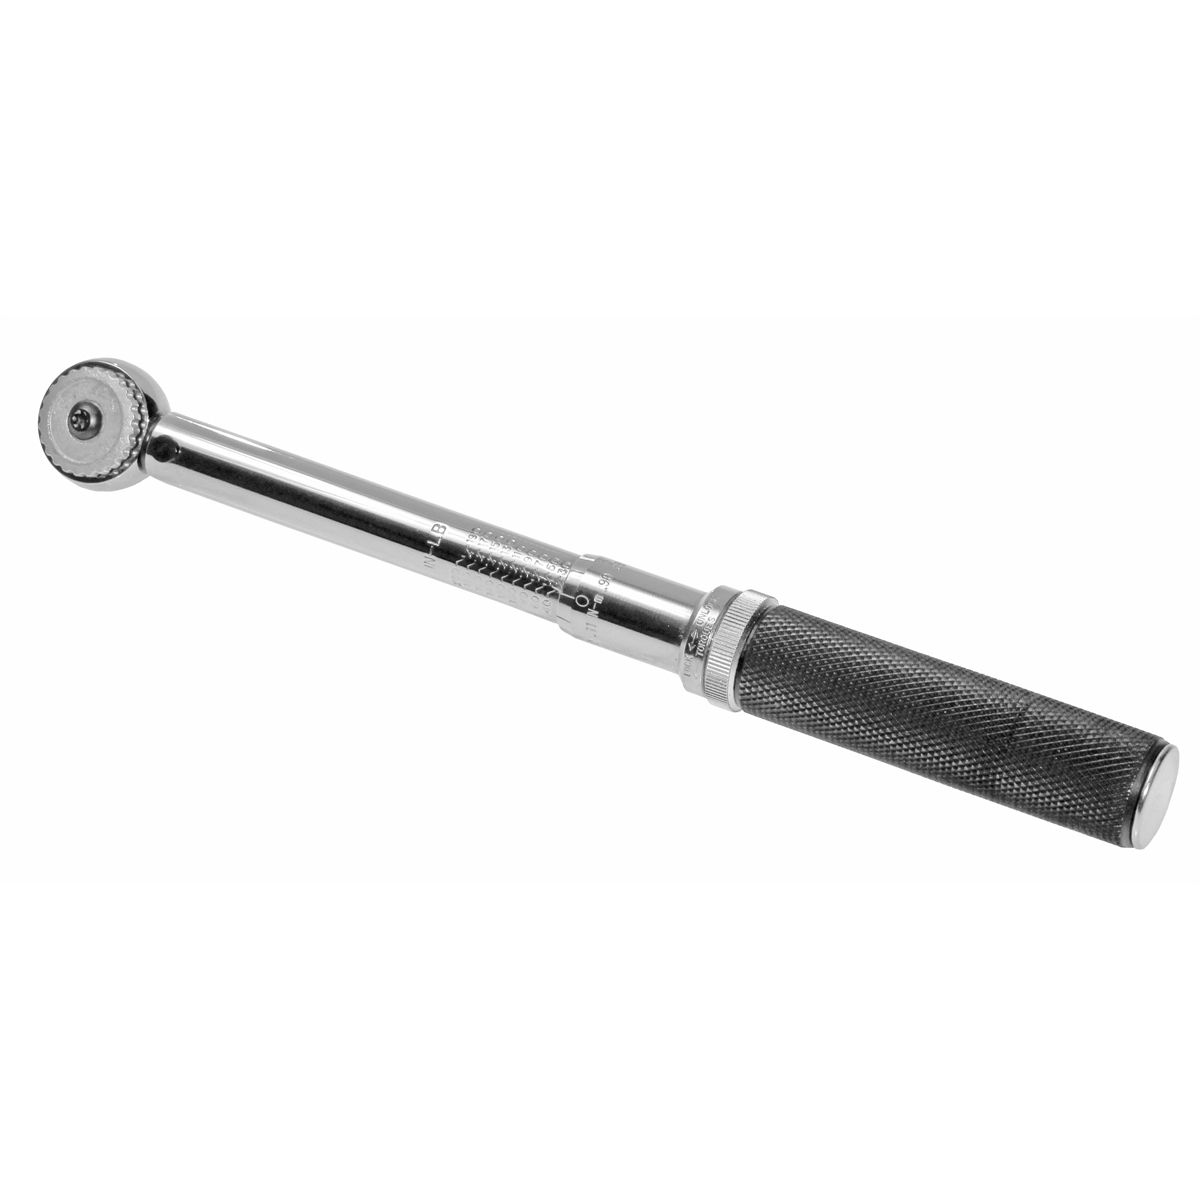 1/4 Drive 20 Inch Pound MICROMETER CLICK TORQUE WRENCH new 